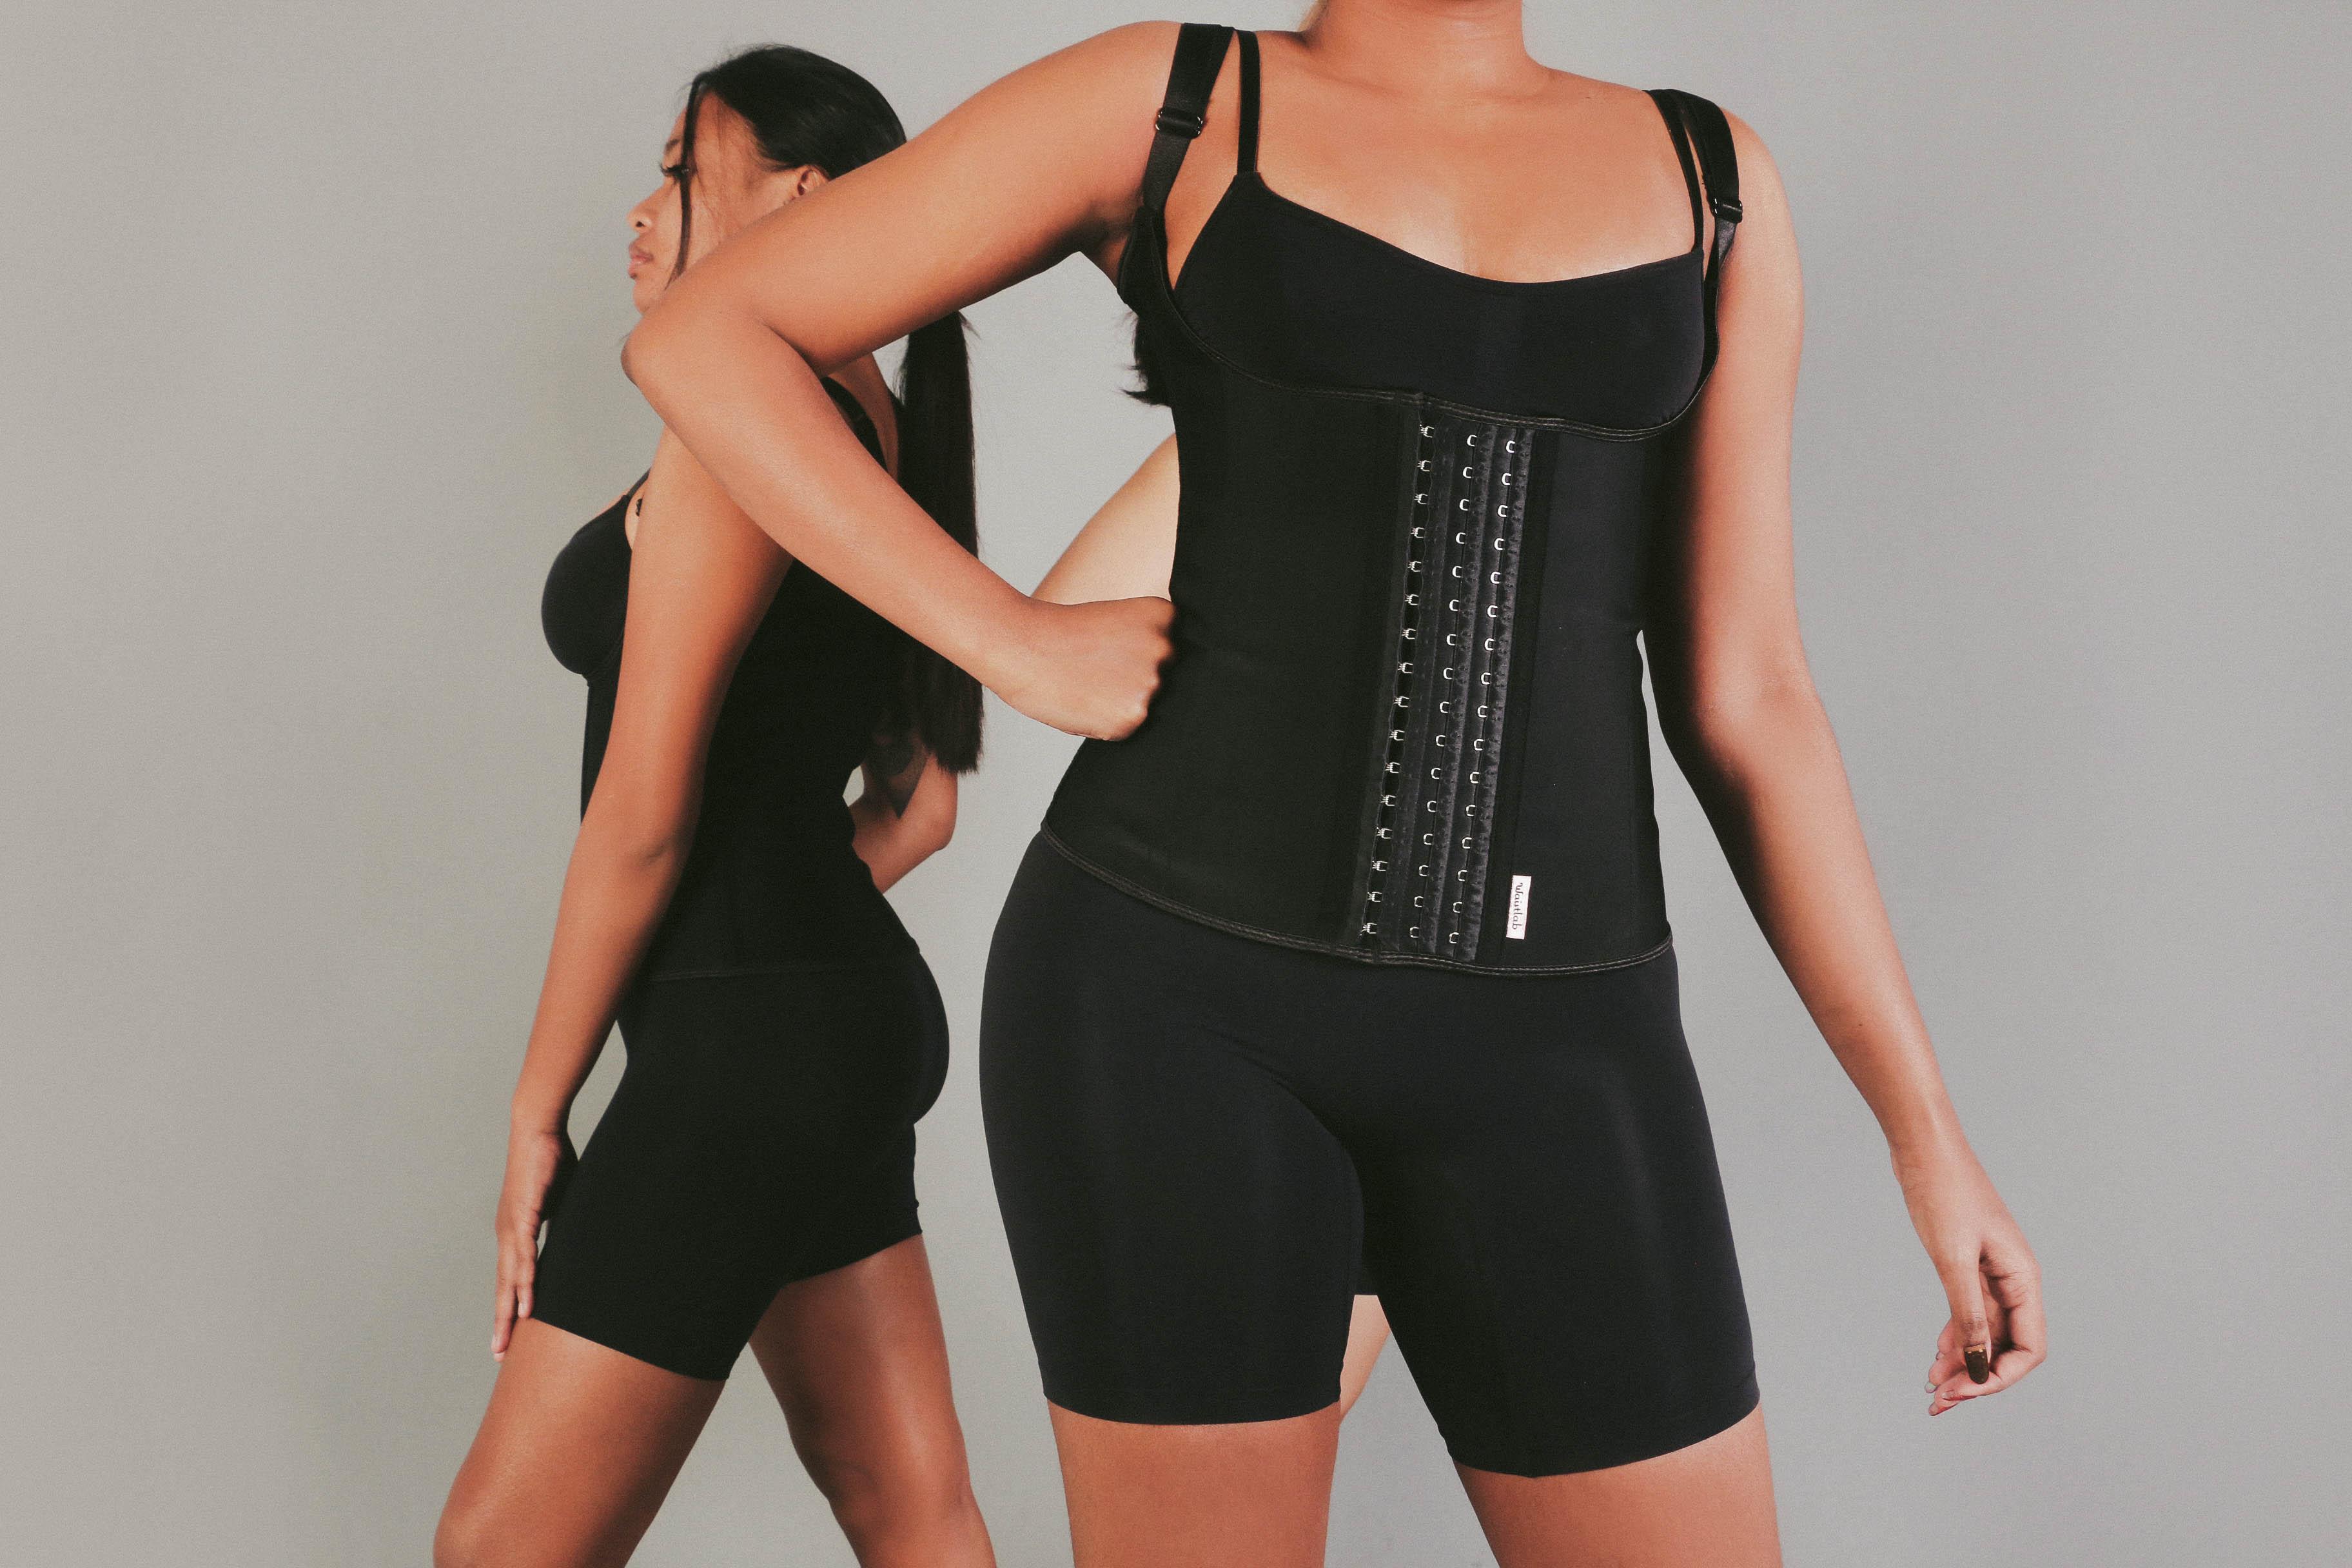 Common Waist Training Mistakes and How To Fix Them – Hourglass Waist